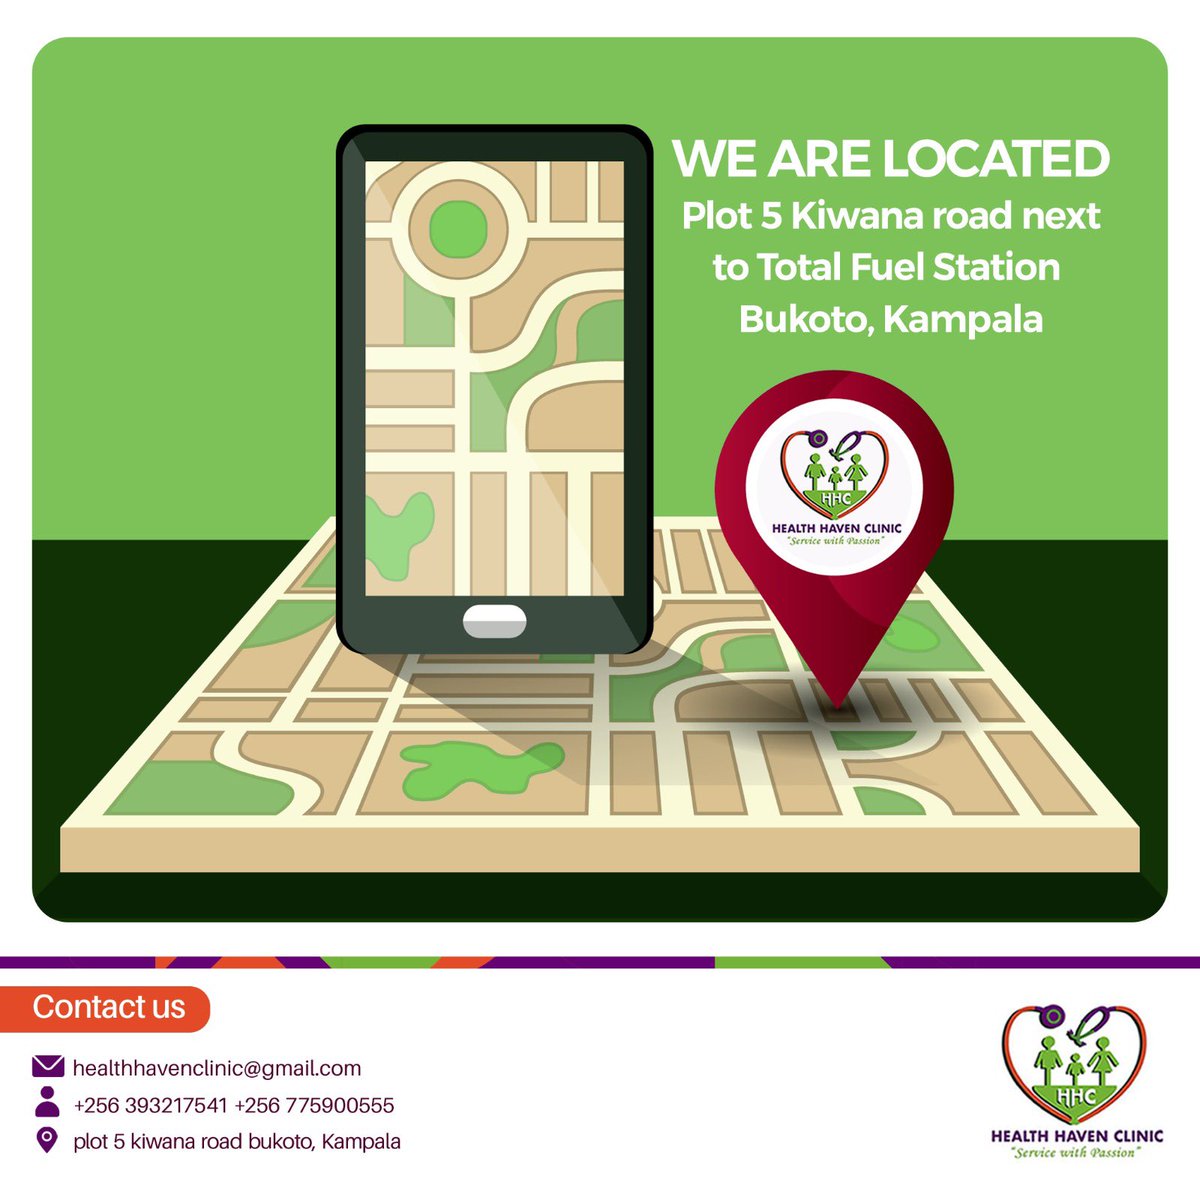 Health Haven Clinic, your trusted health partner, is conveniently located at Plot 5 Kiwana Road next to Total fuel station Bukoto, Kampala. Ready to serve you with top-notch healthcare services. 🏥 #HealthHavenClinicUg